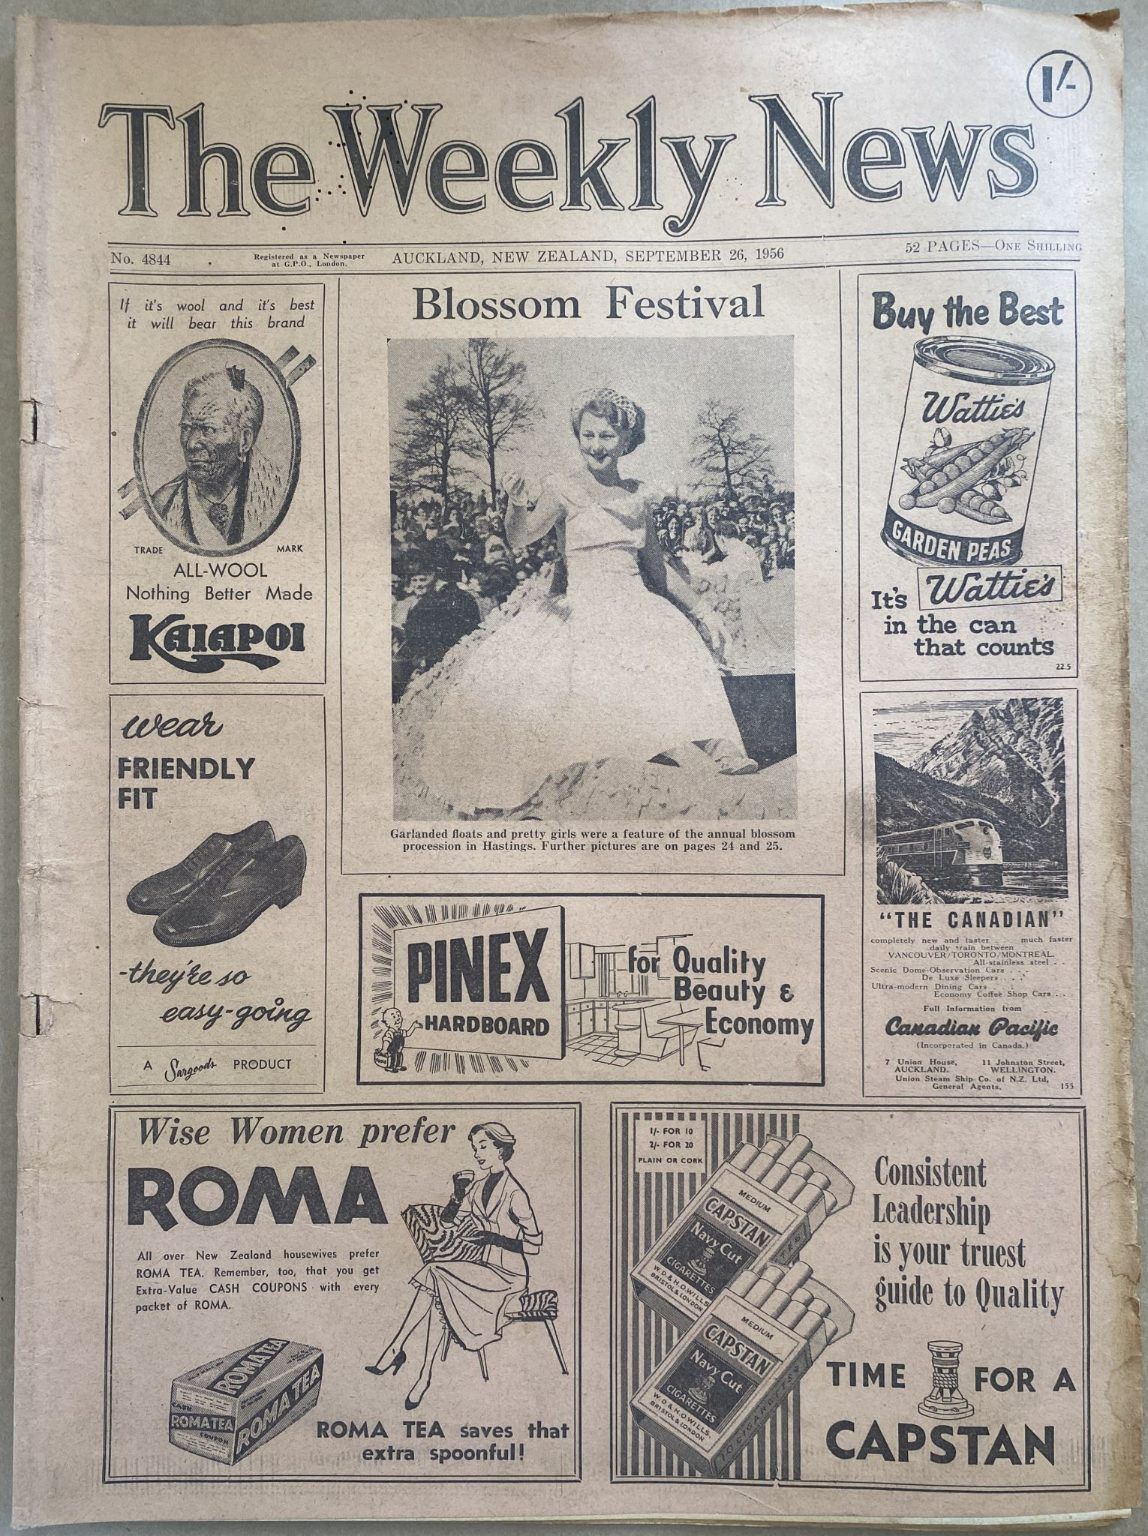 OLD NEWSPAPER: The Weekly News - No. 4844, 26 September 1956